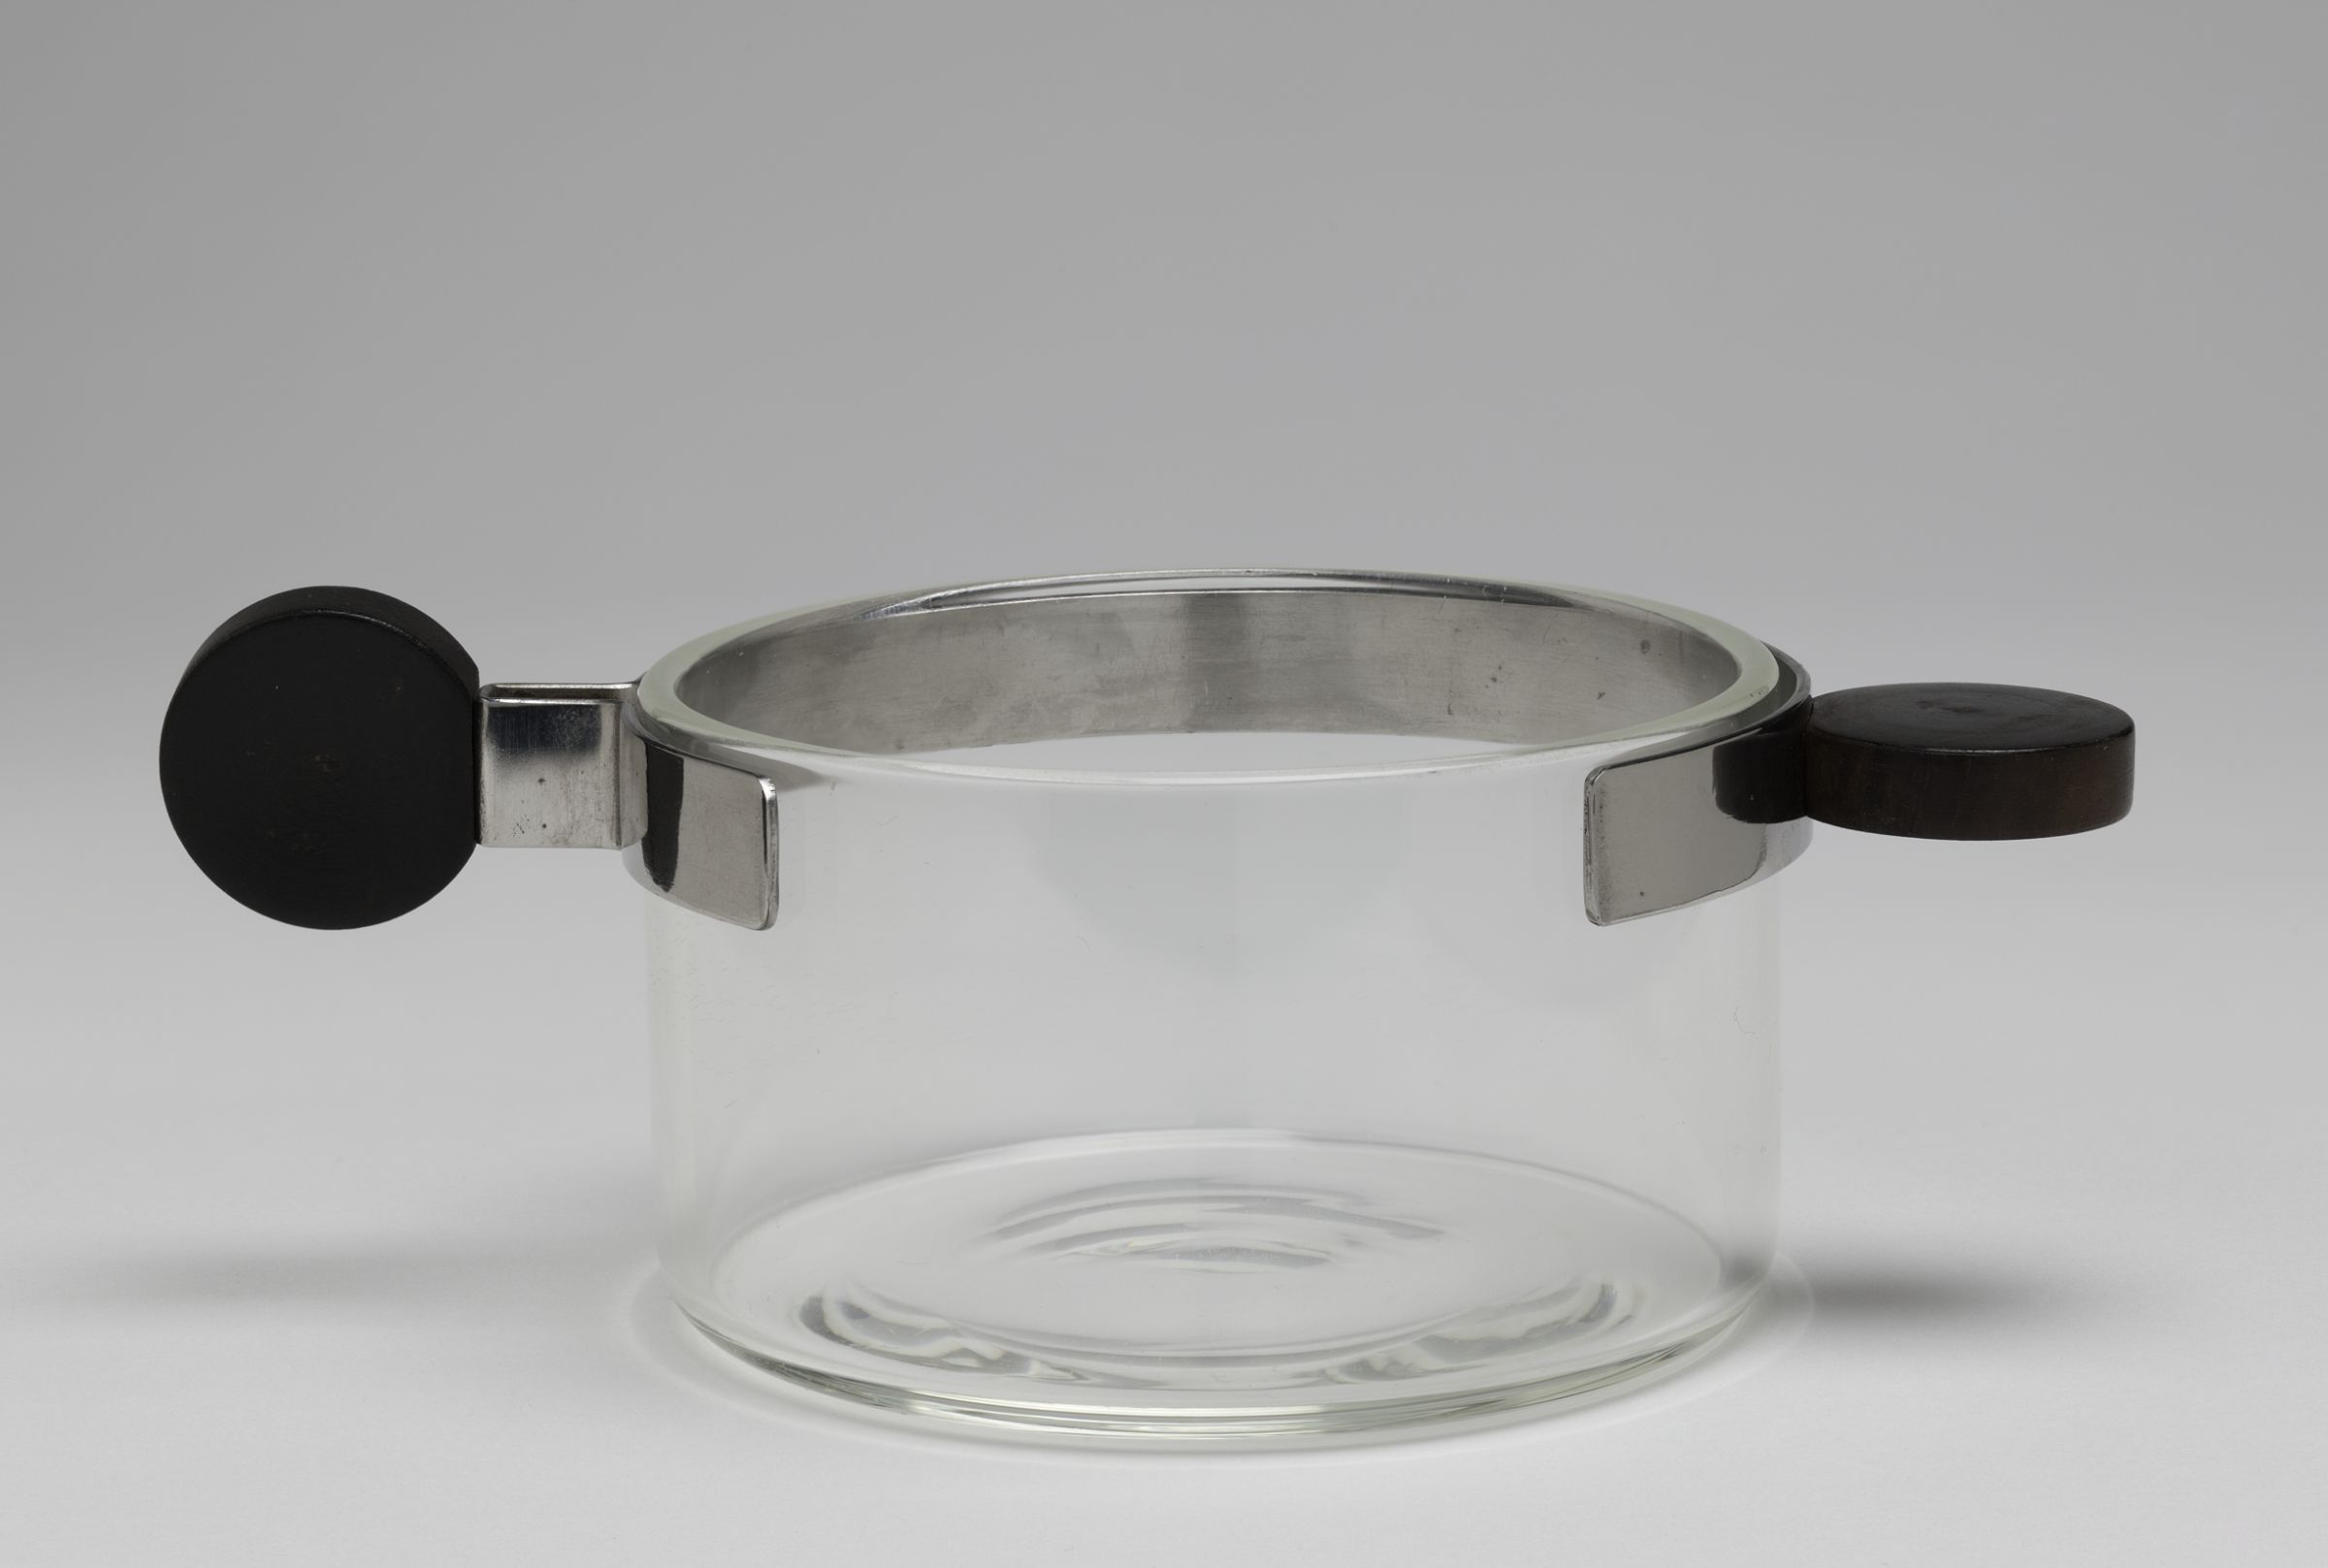 Josef Albers, “Tea Glass Holder”, 1926 (Harvard Art Museums/Busch-Reisinger Museum, Gift of Walter Gropius © The Josef and Anni Albers Foundation/Artists Rights Society (ARS), New York)